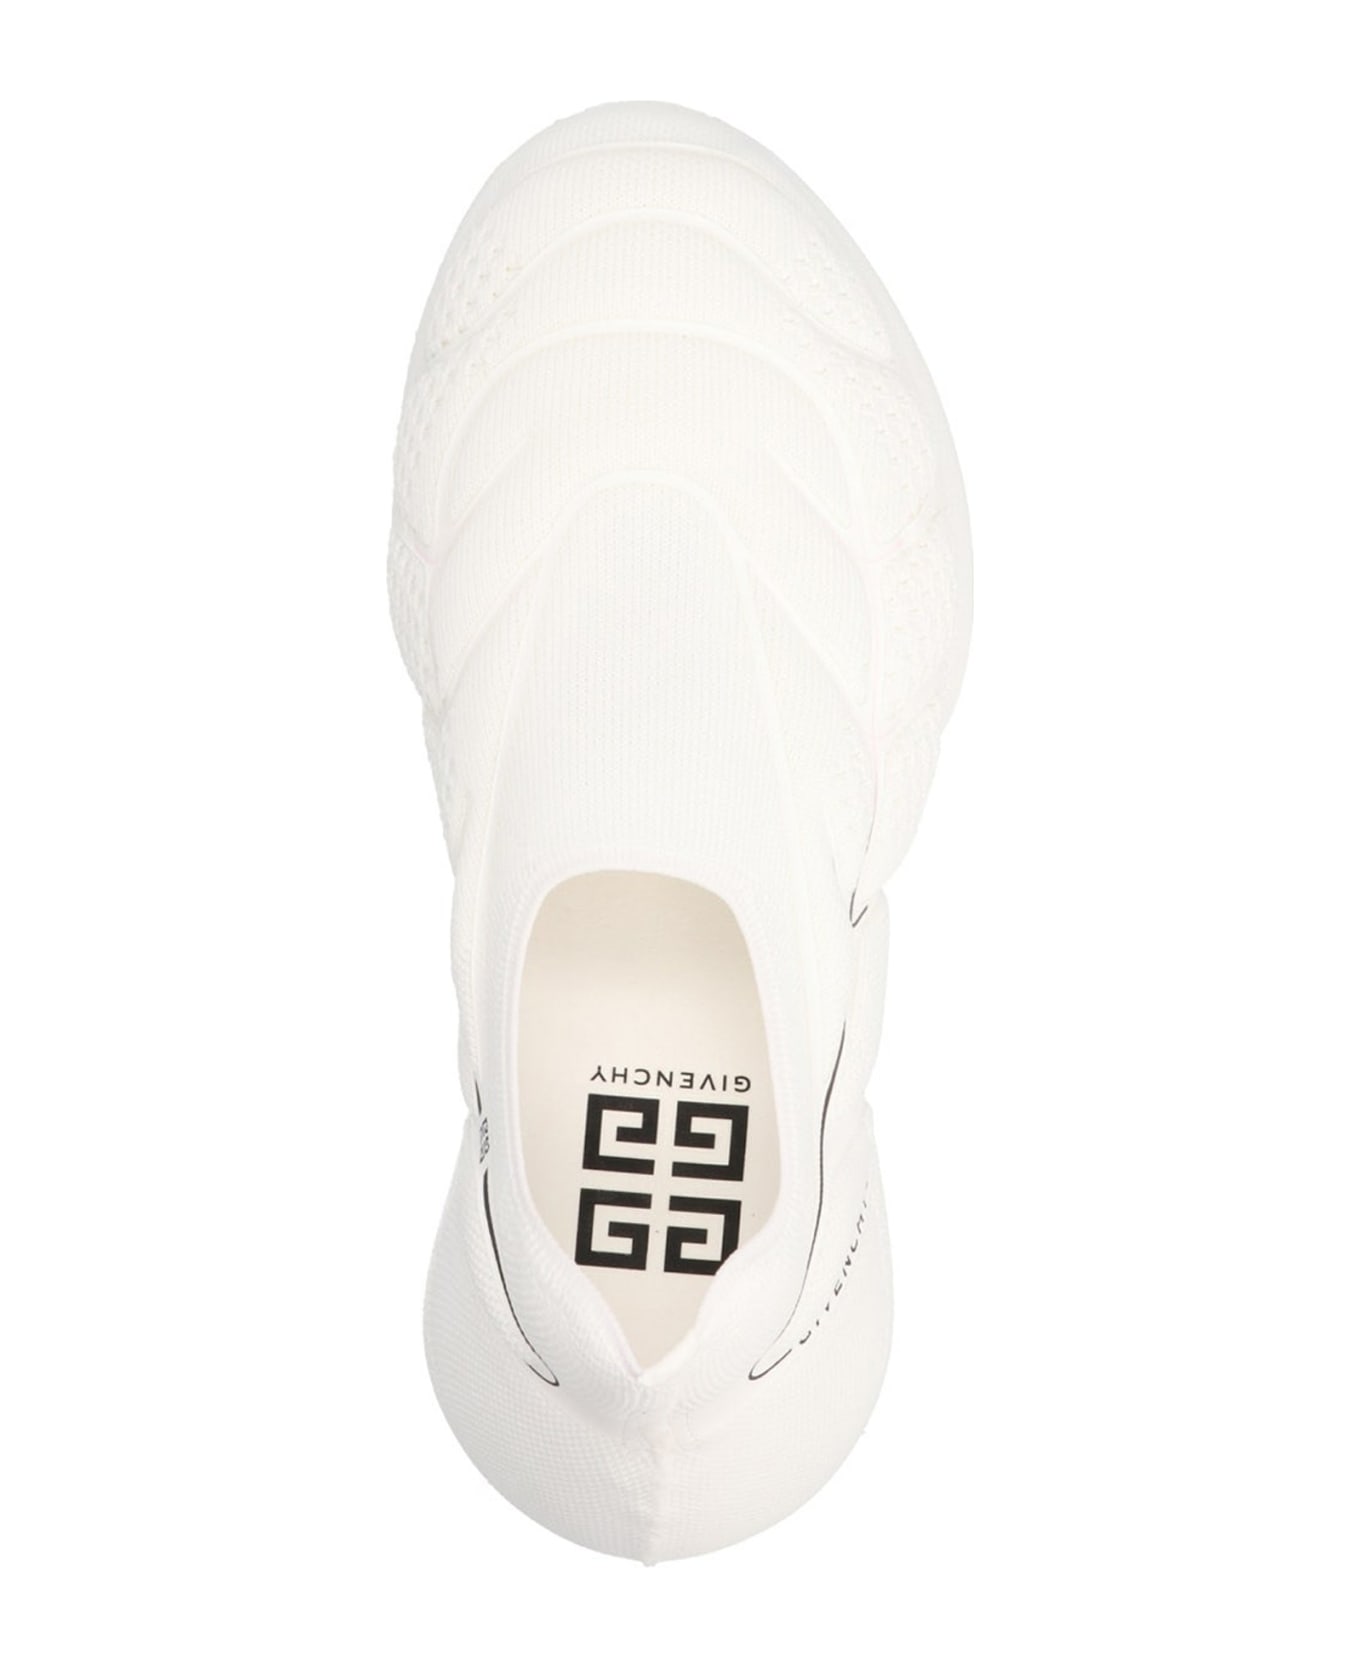 Givenchy Tk-360 Sneakers - White スニーカー